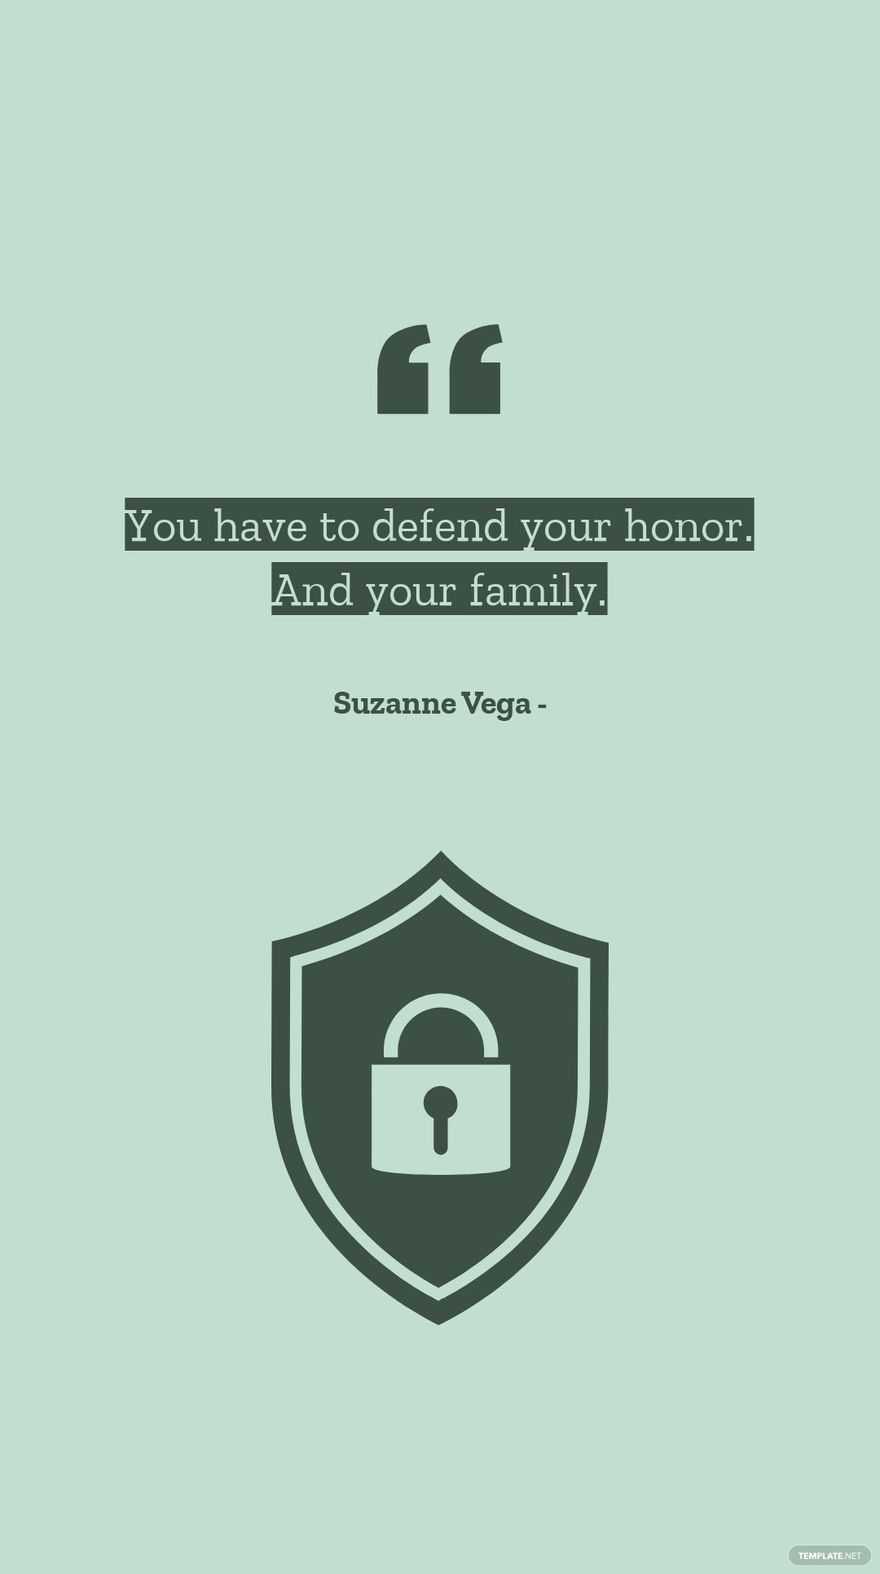 Free Suzanne Vega - You have to defend your honor. And your family. in JPG